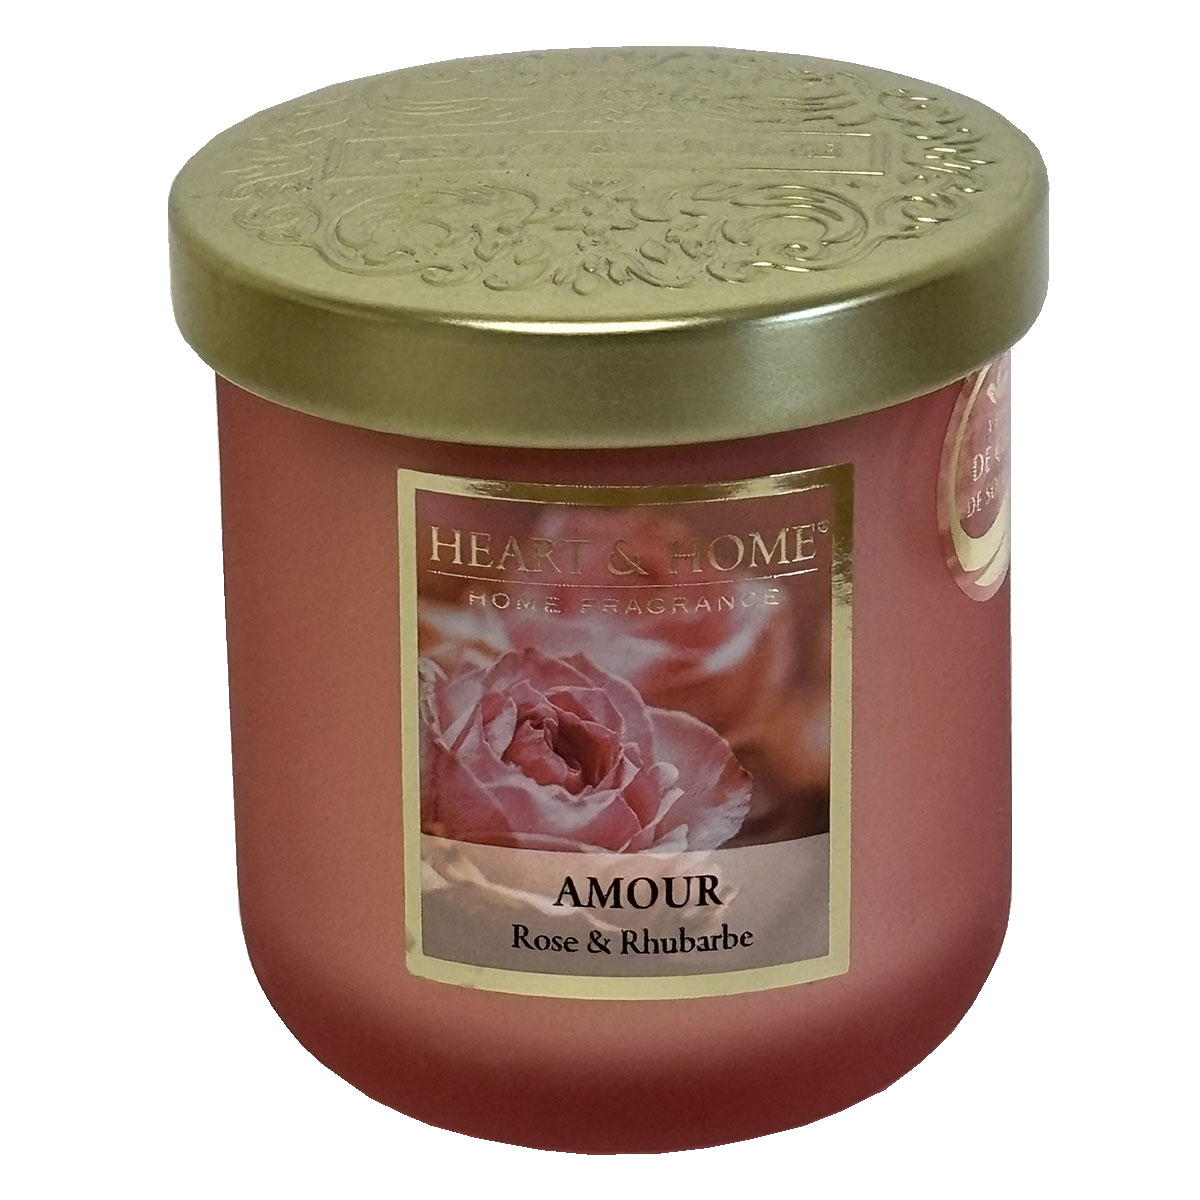 Bougie Heart and Home 30 heures - Amour